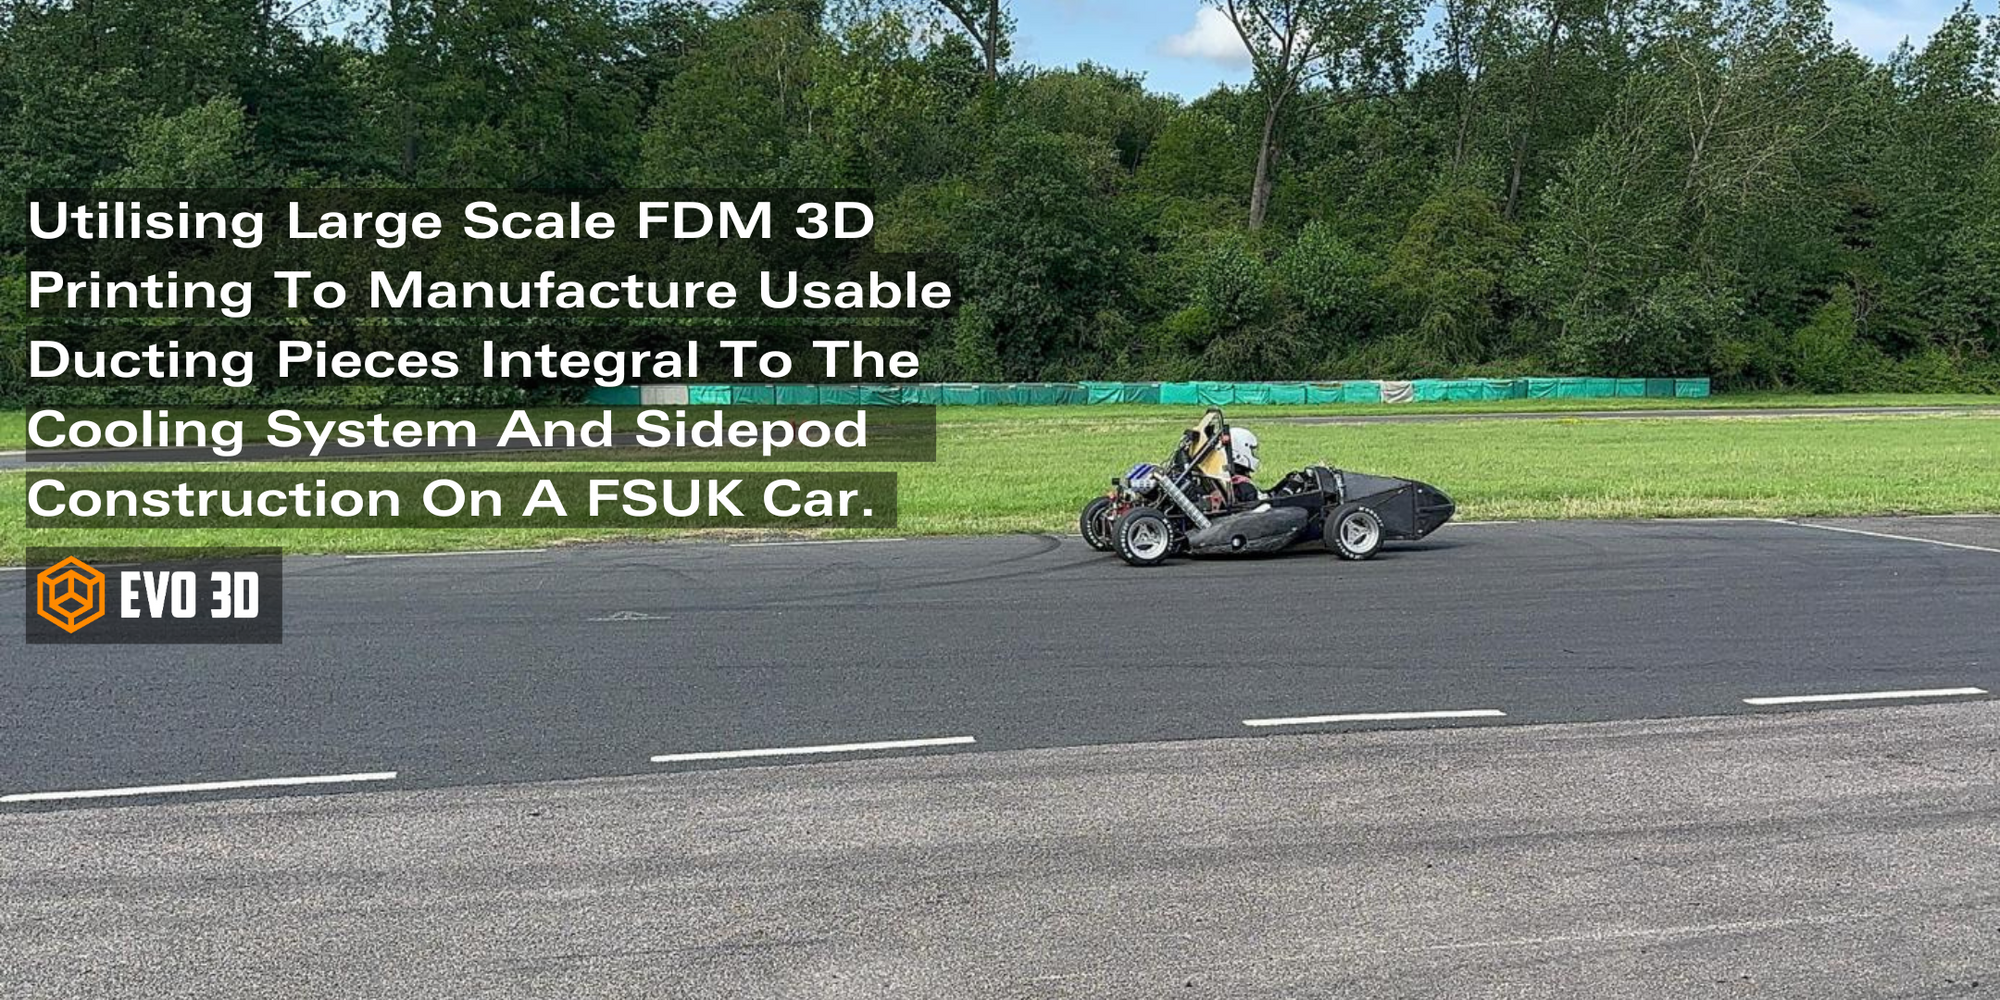 Utilising large scale FDM 3D printing to manufacture usable ducting pieces integral to the cooling system and sidepod construction on a FSUK car.